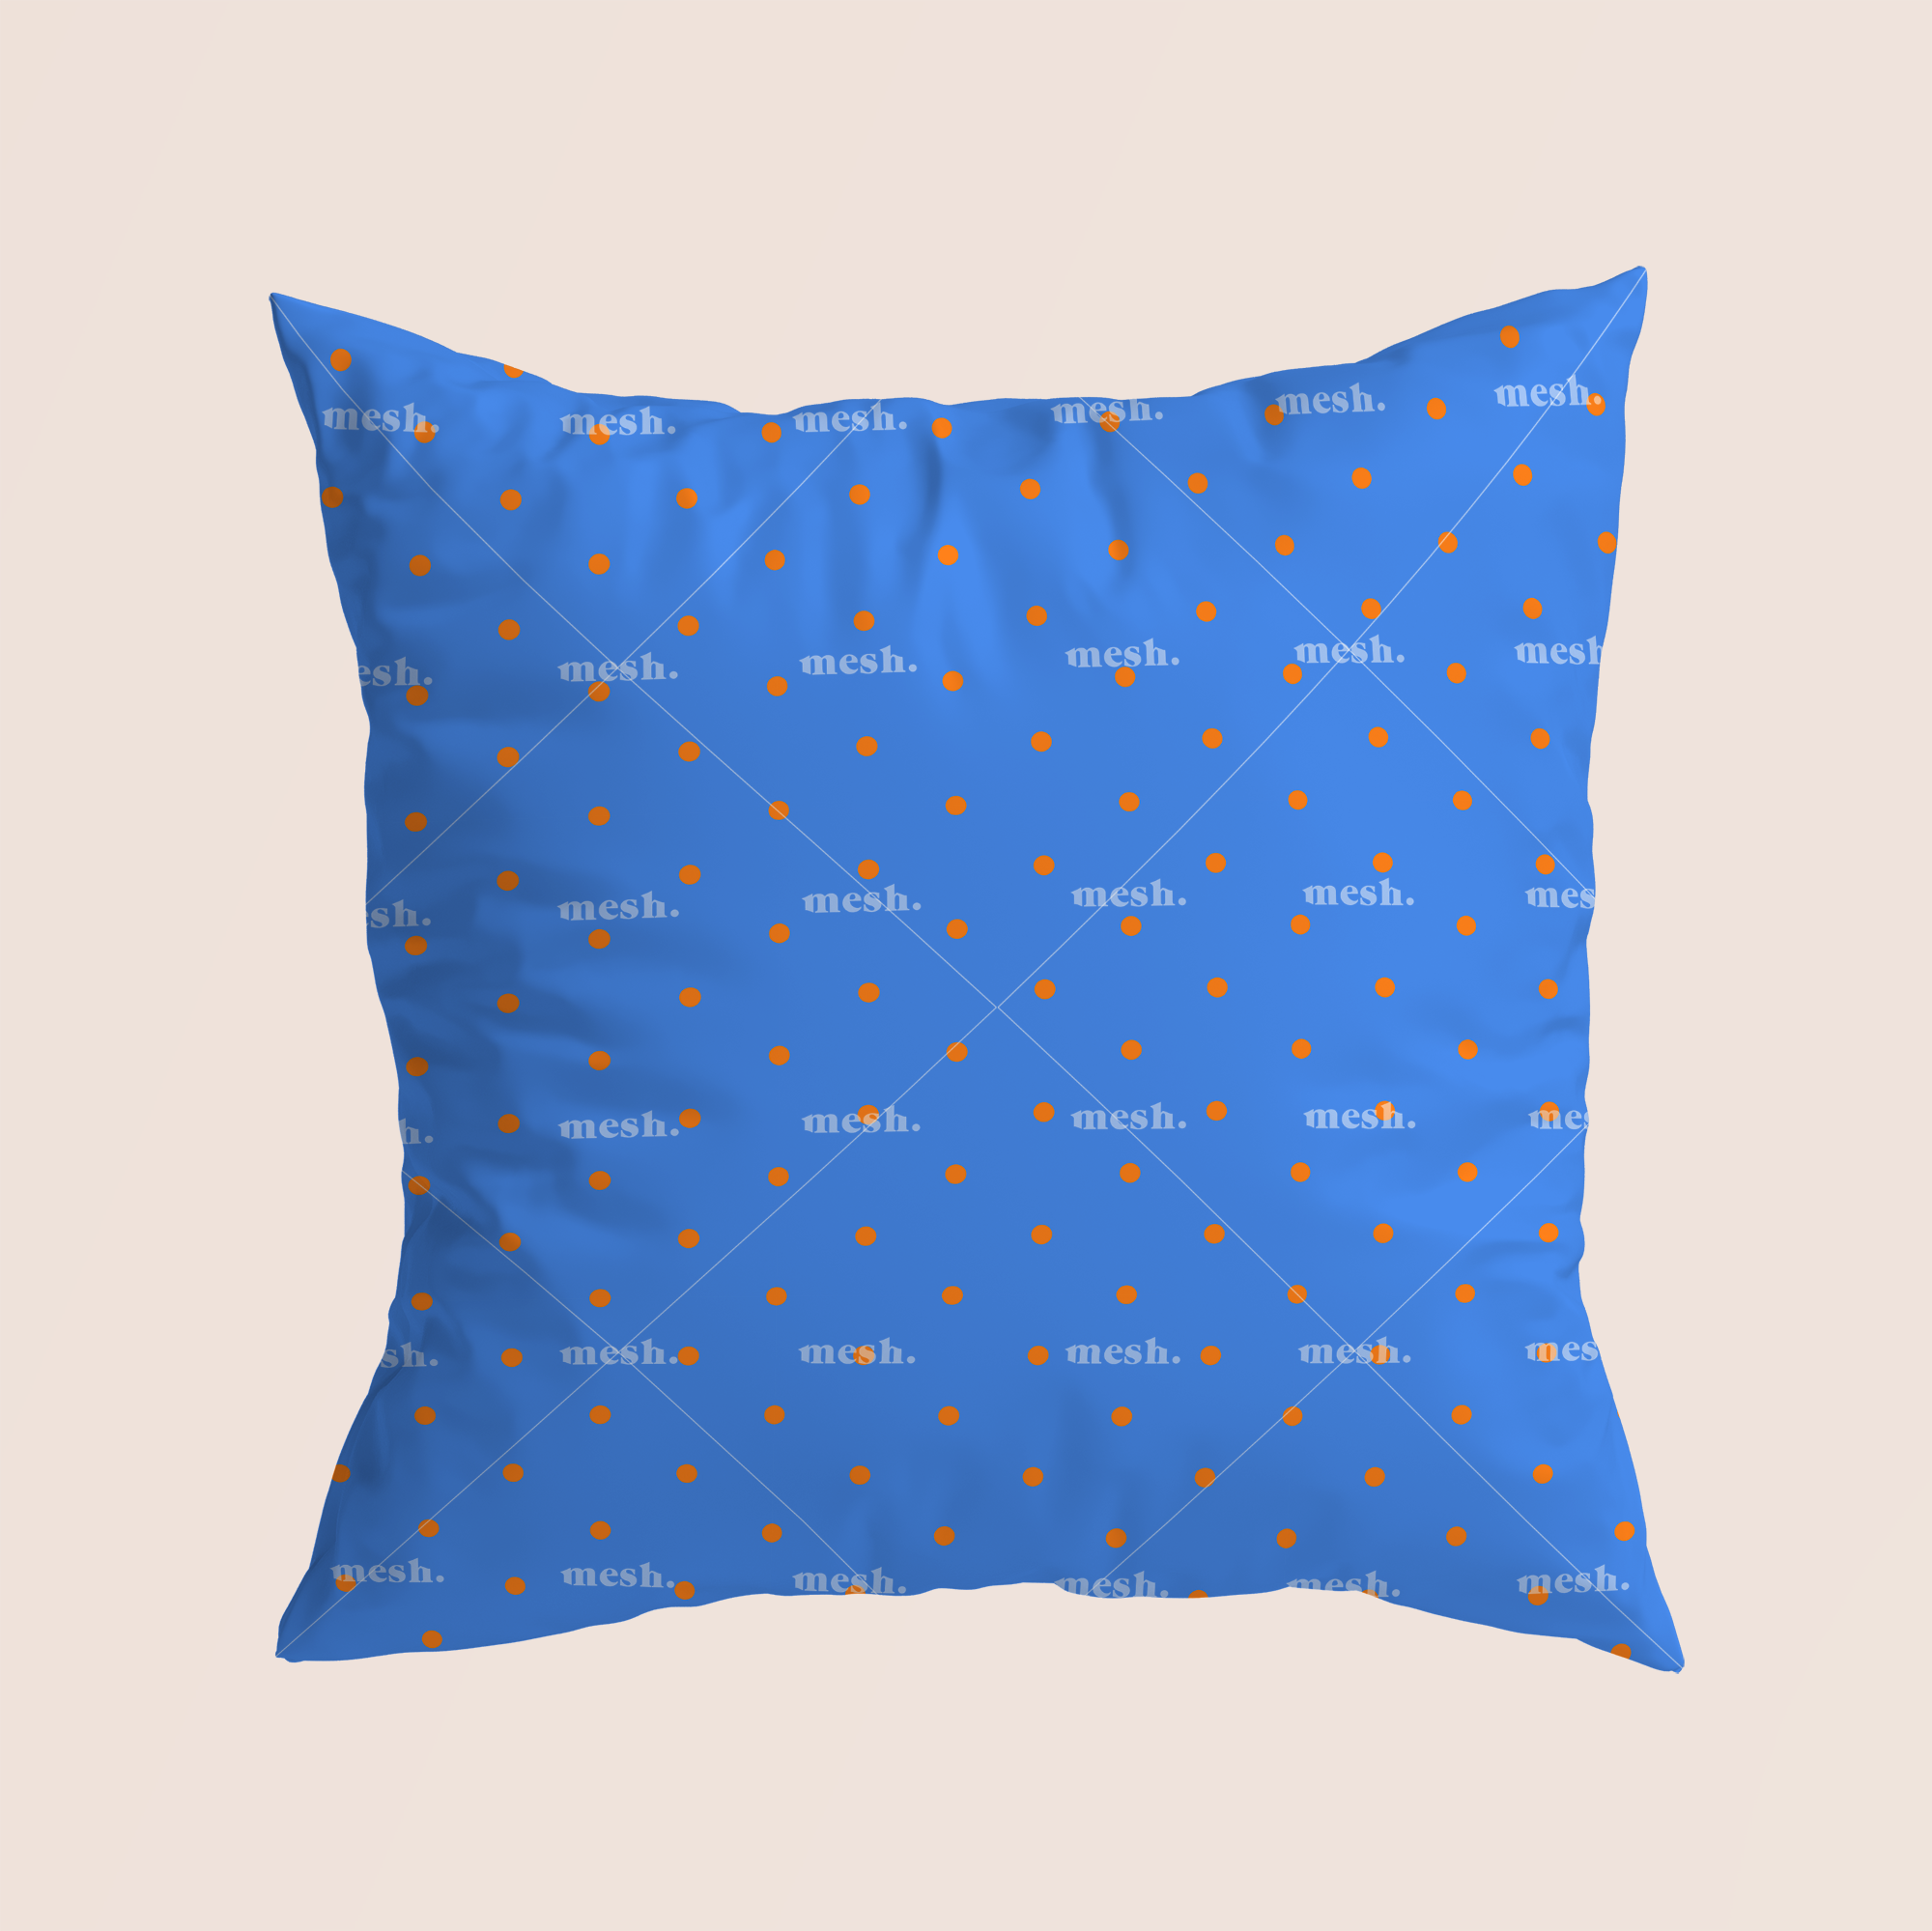 Trivial dots trendy in blue pattern design printed on recycled fabric pillow